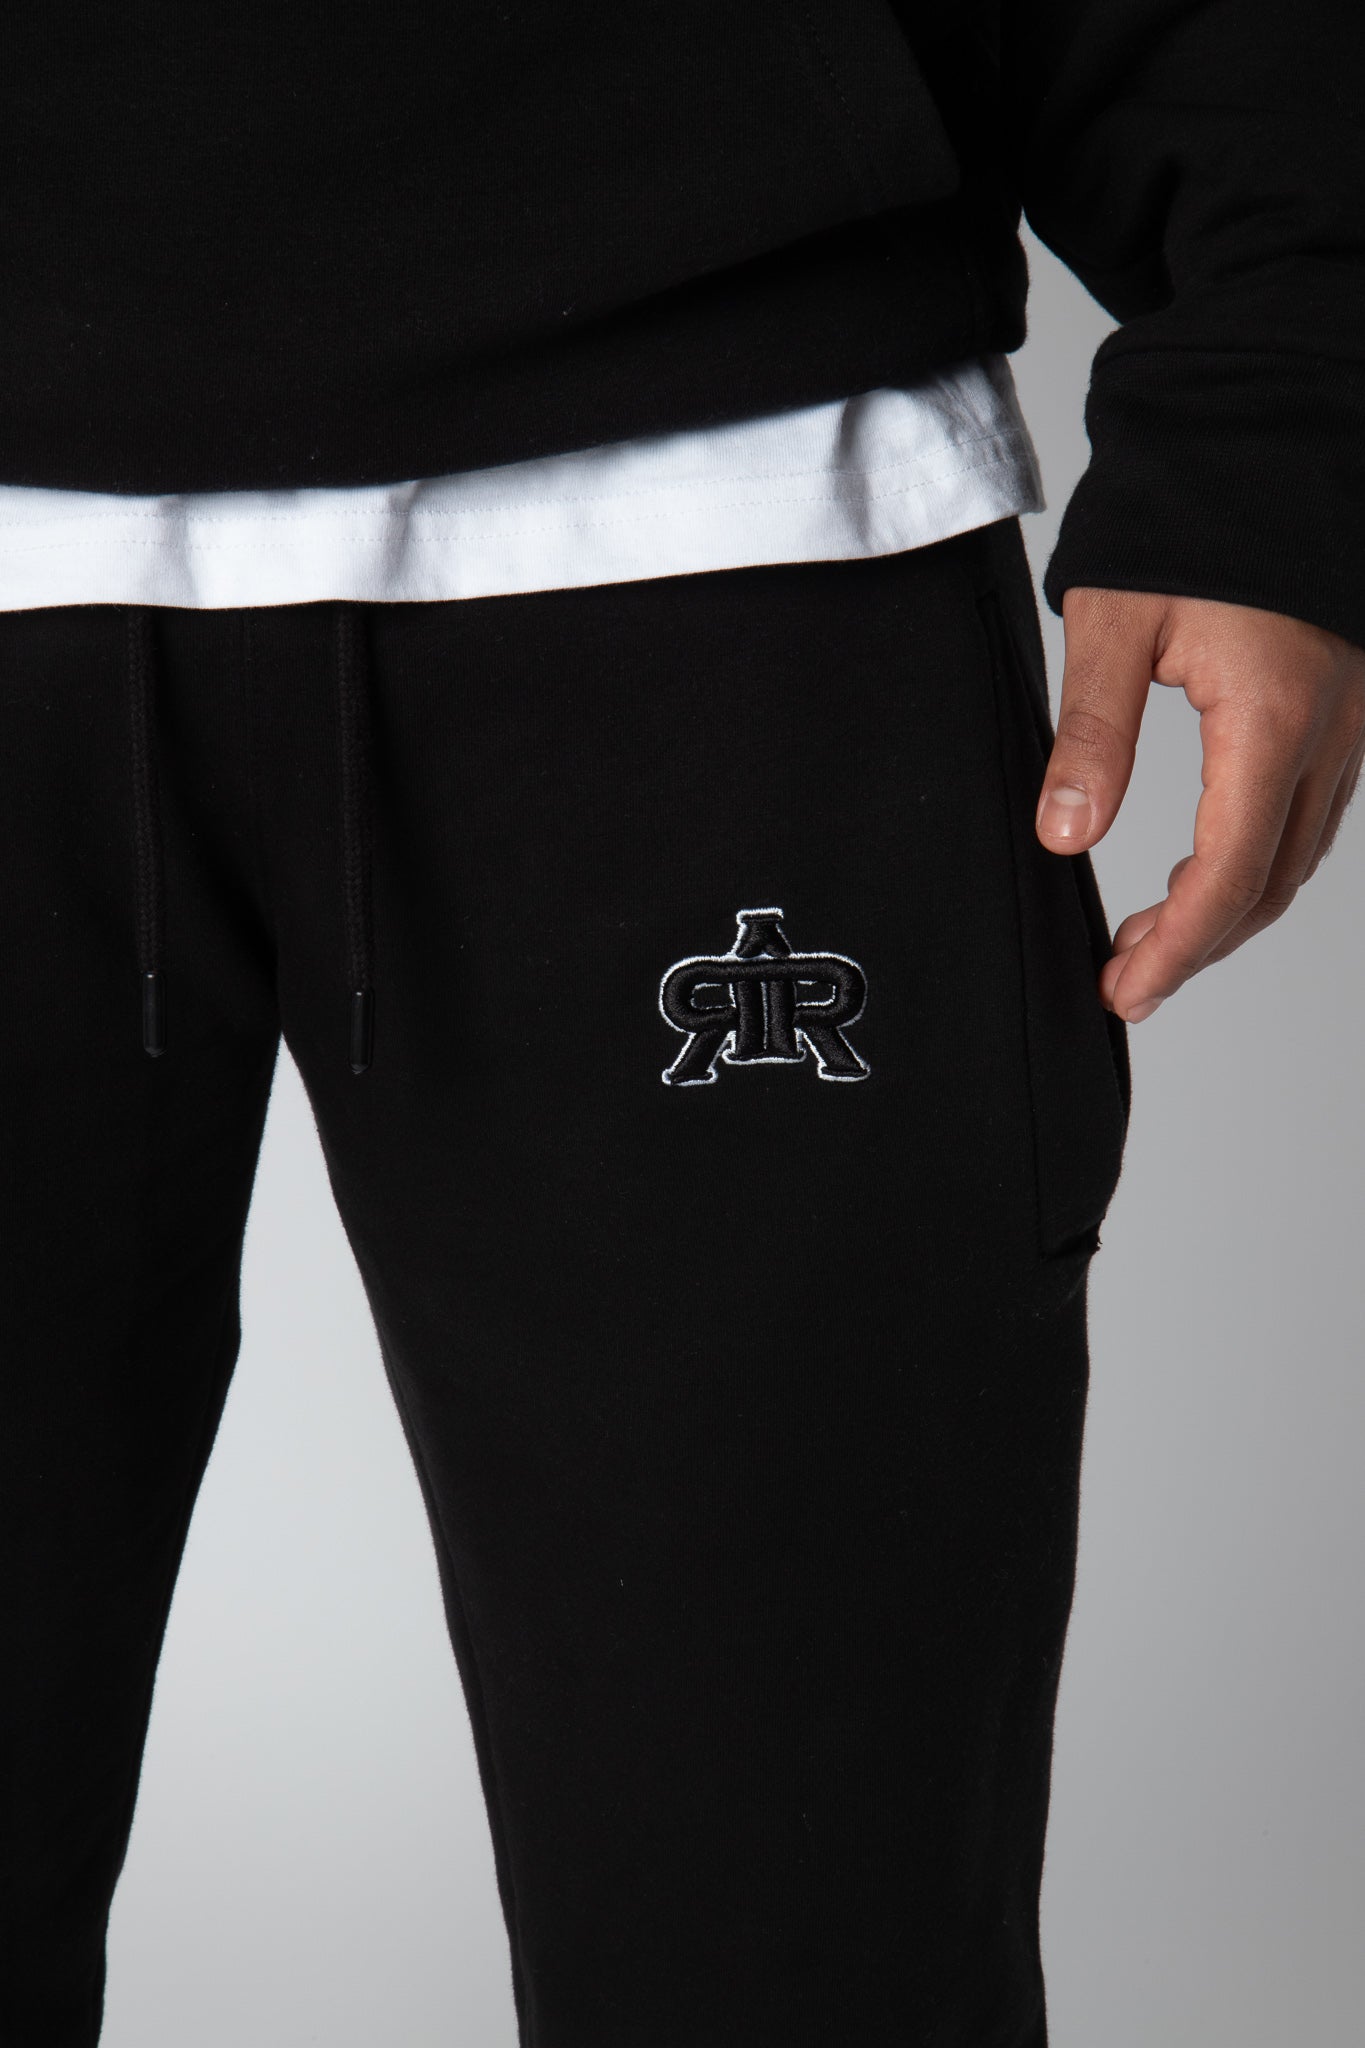 The Motto Tracksuit - Black